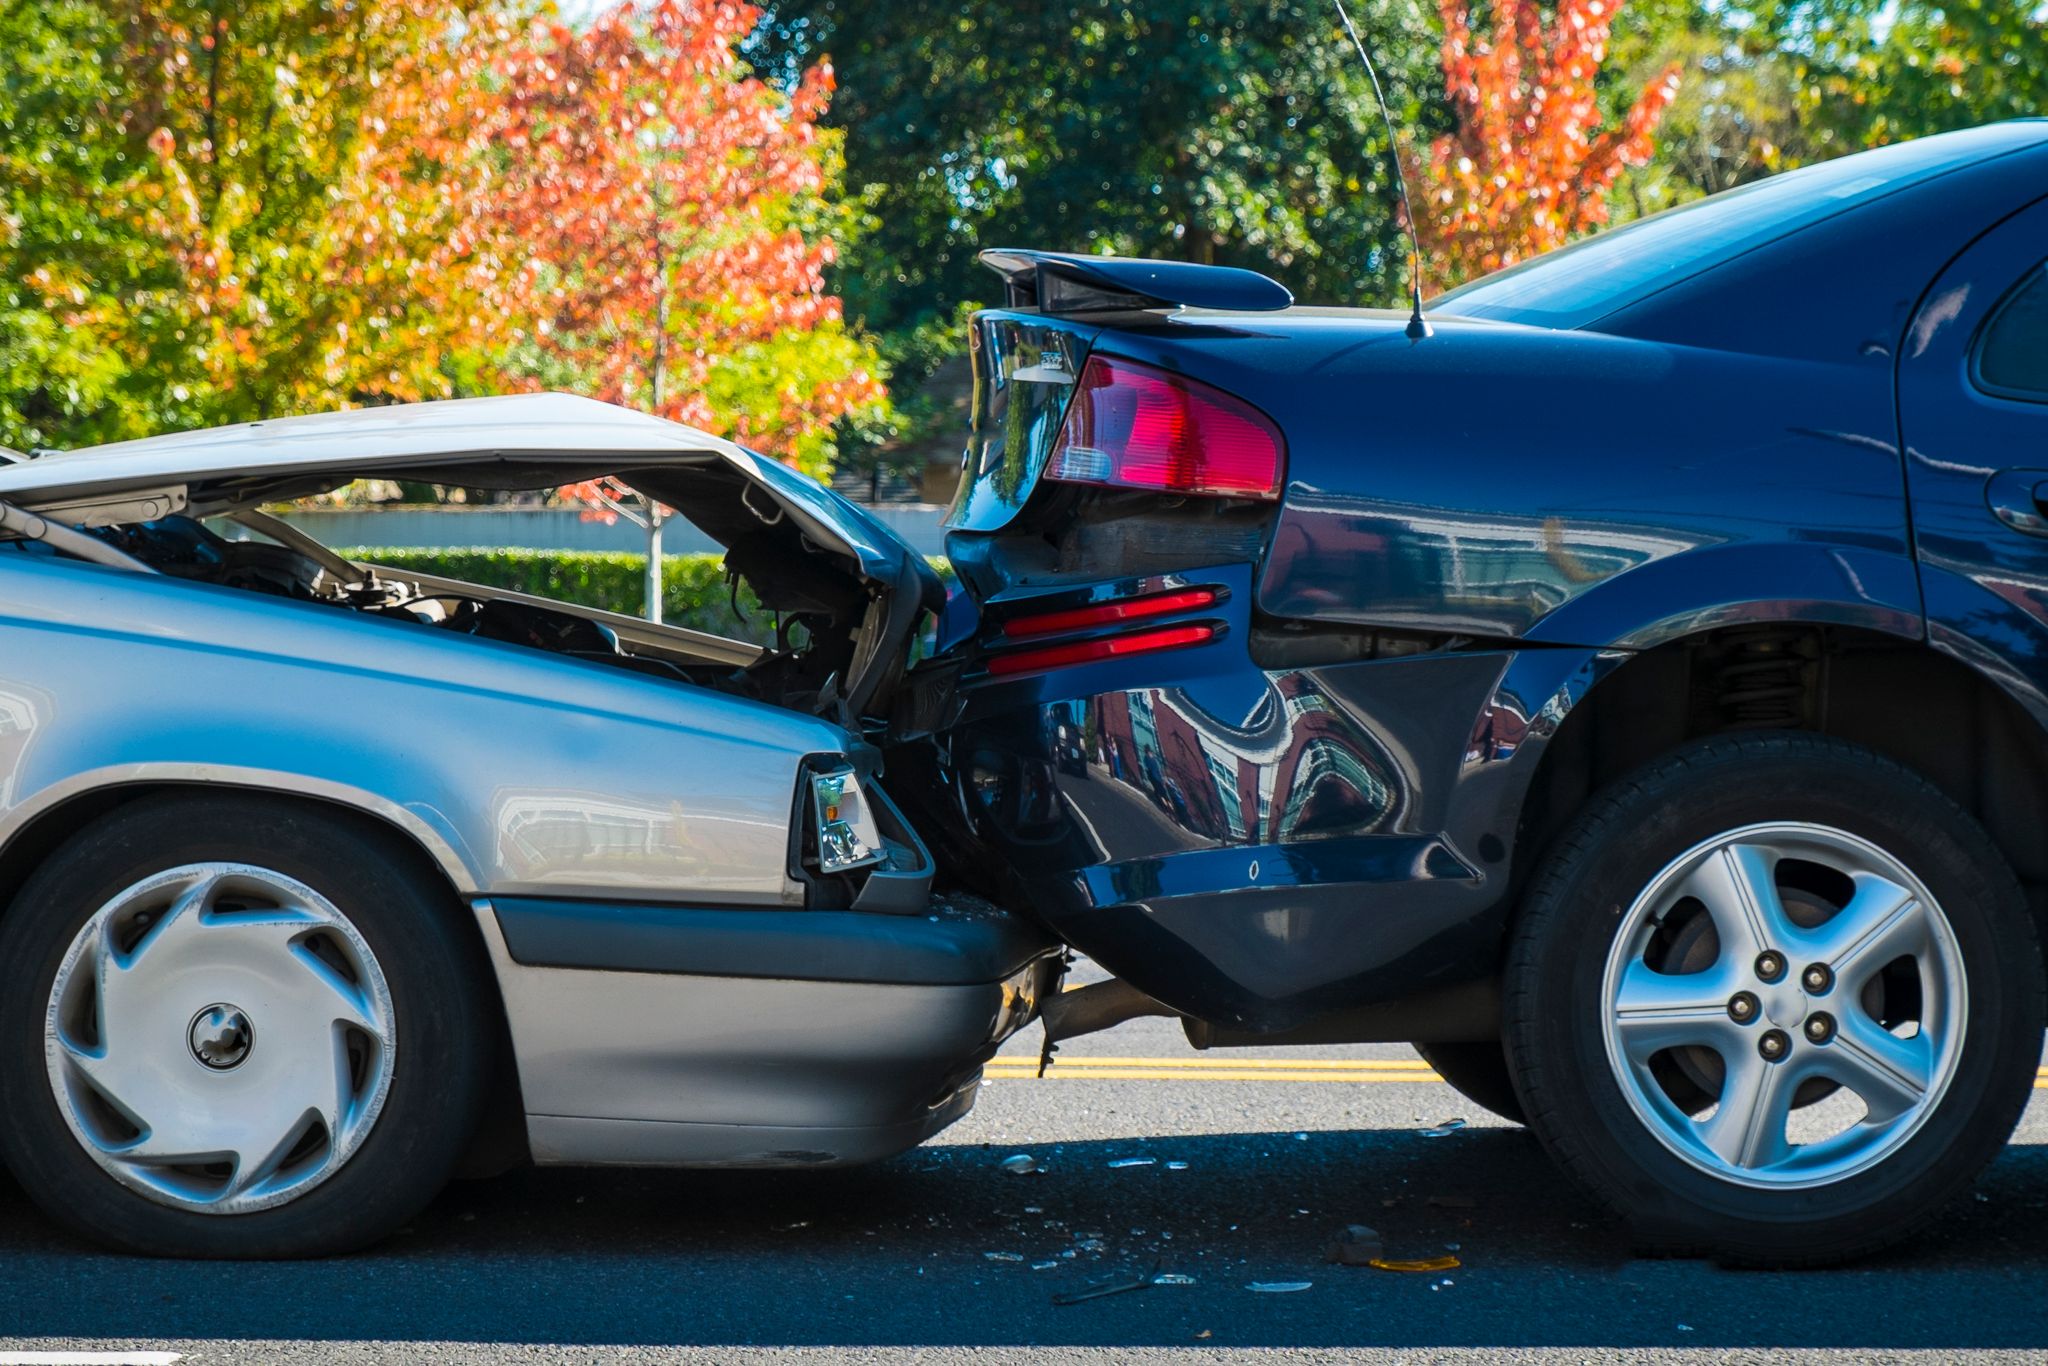 Auto-accident-involving-two-cars-451333971_3586x2391.jpeg